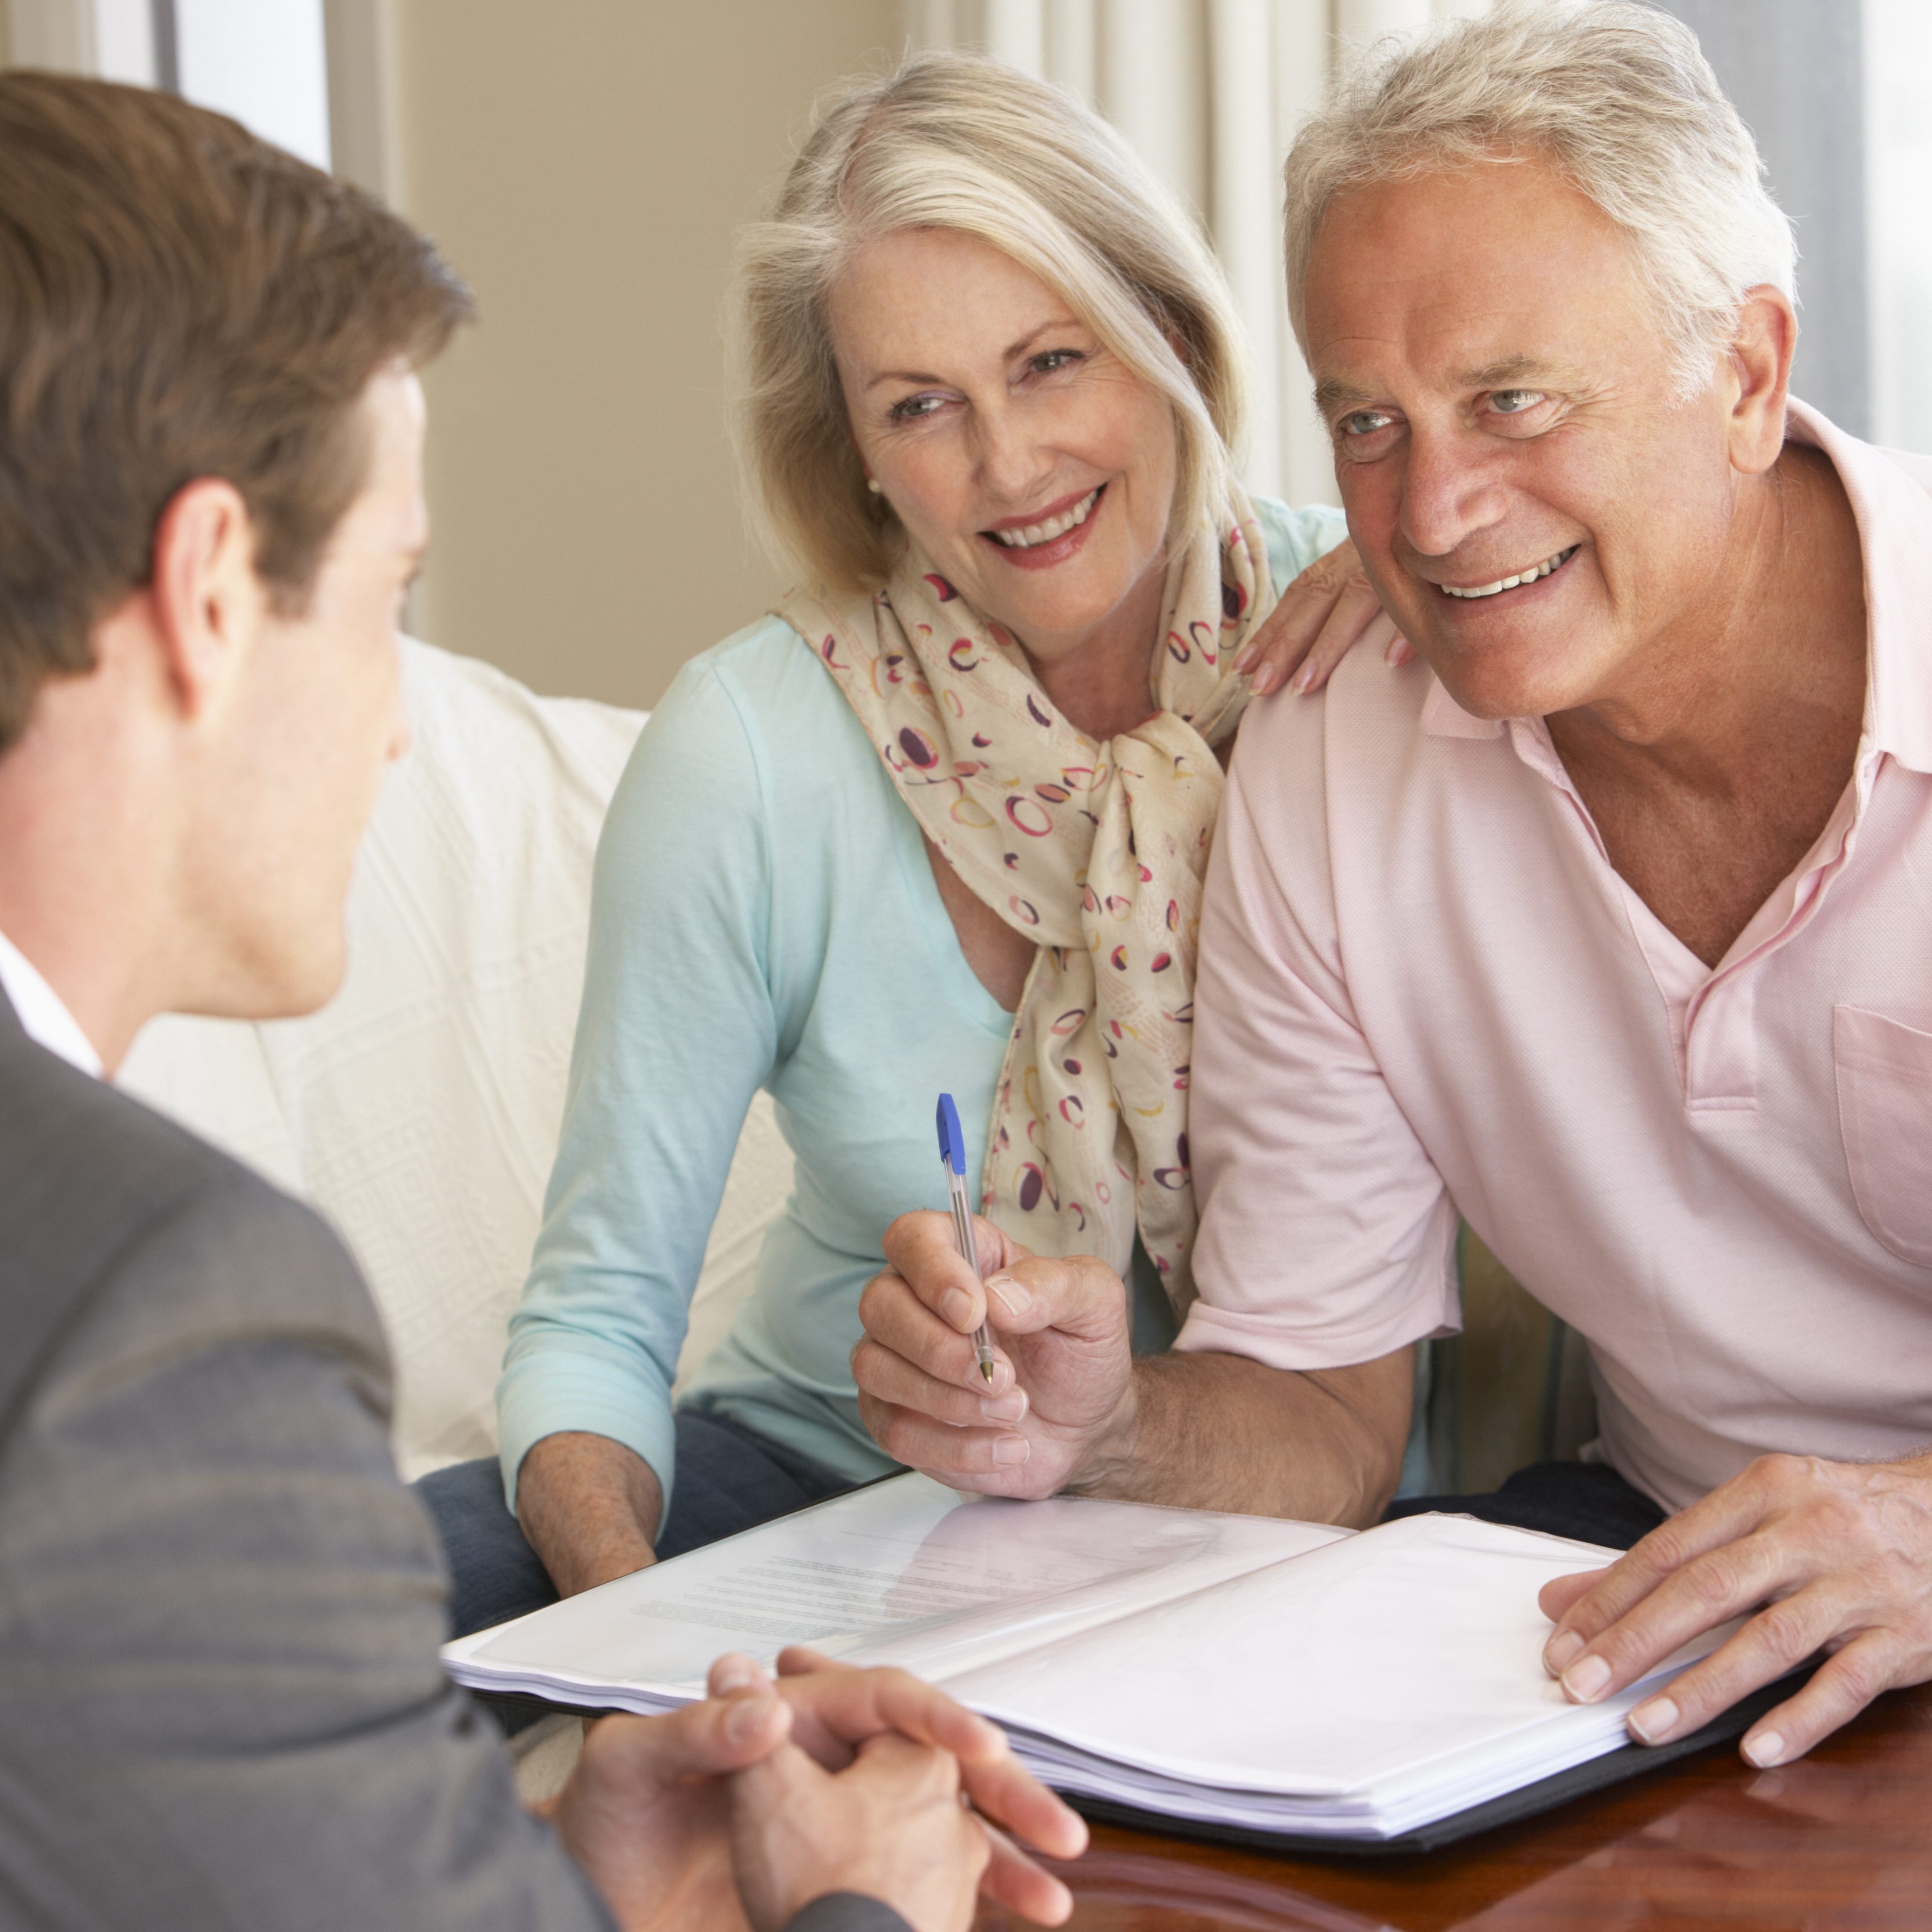 Senior Couple Meeting With Financial Advisor At Home And Smiling